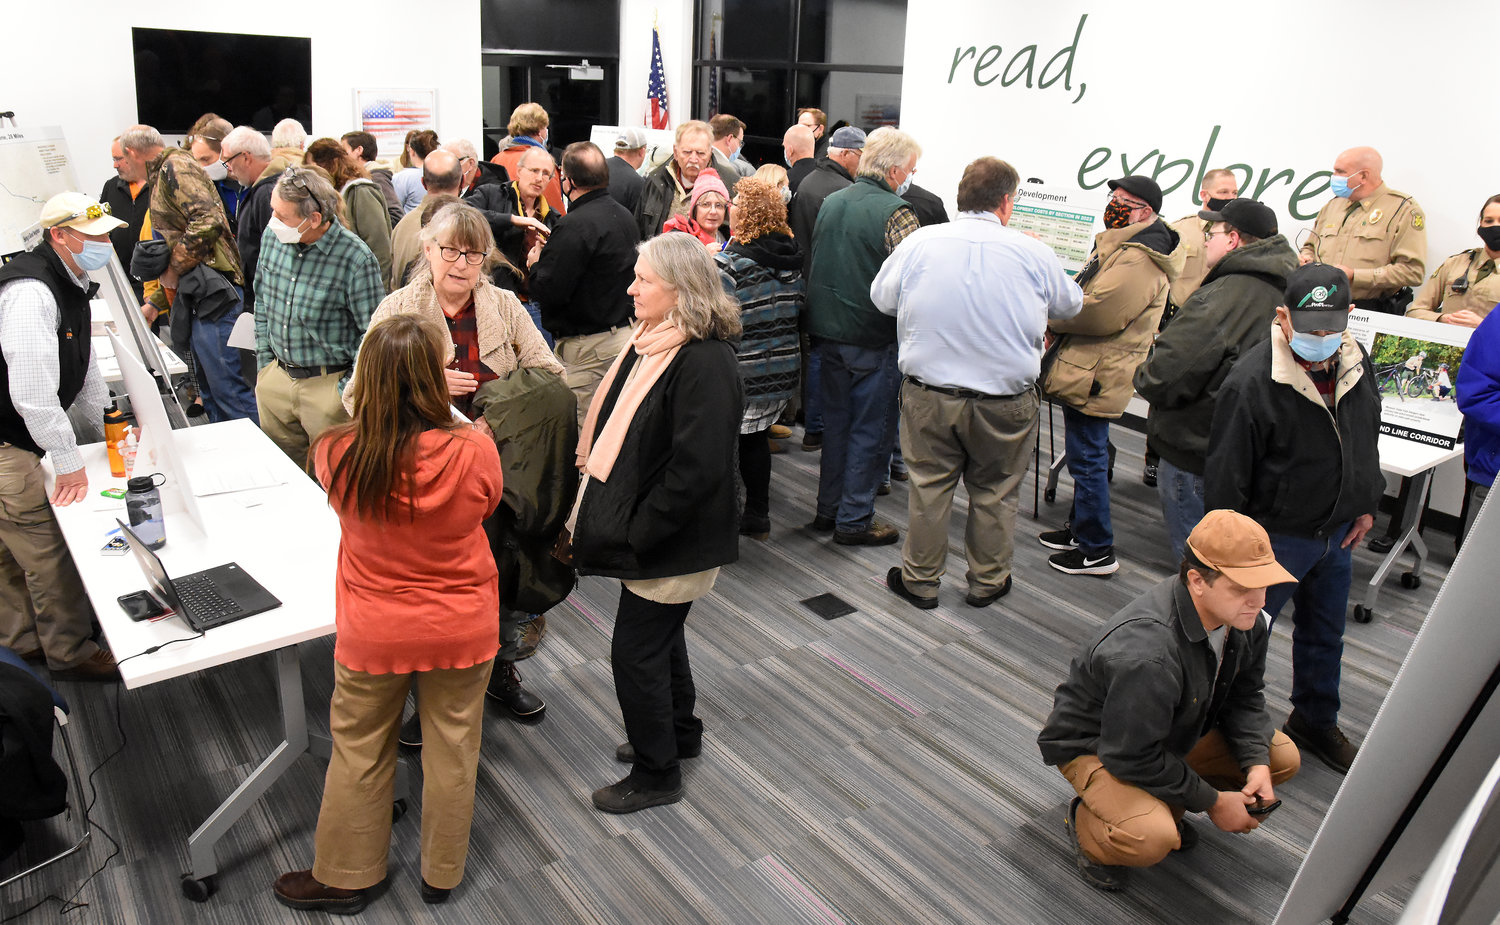 An open house with informational displays presented by state agencies including DNR and State Parks (right) drew visitors to the Owensville branch of Scenic Regional Library’s meeting room earlier in the evening.